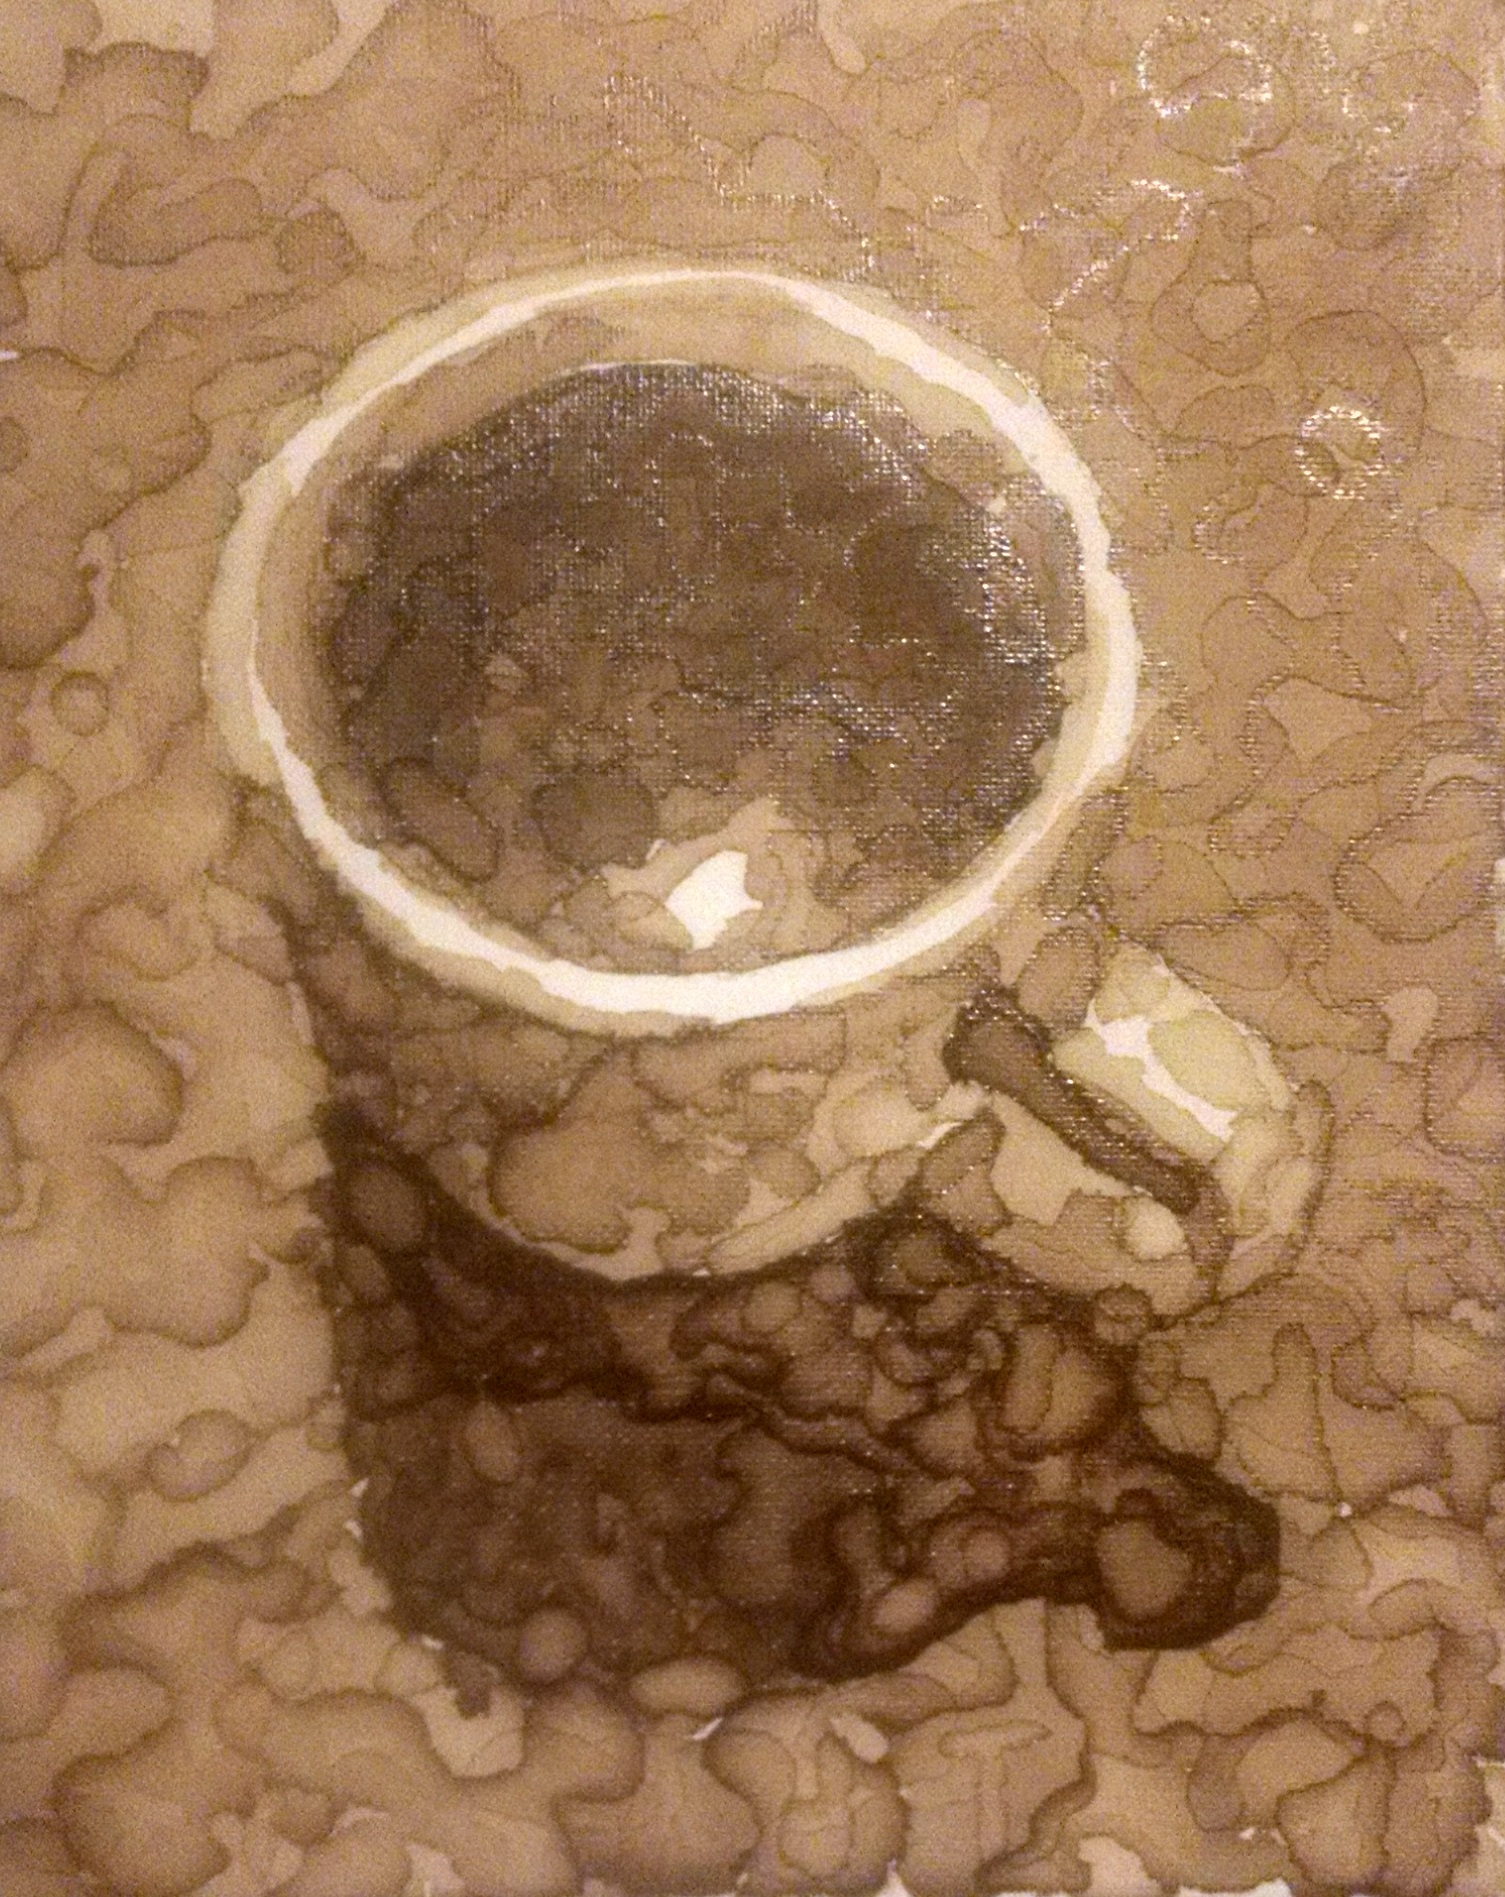 A cup using spilled coffee